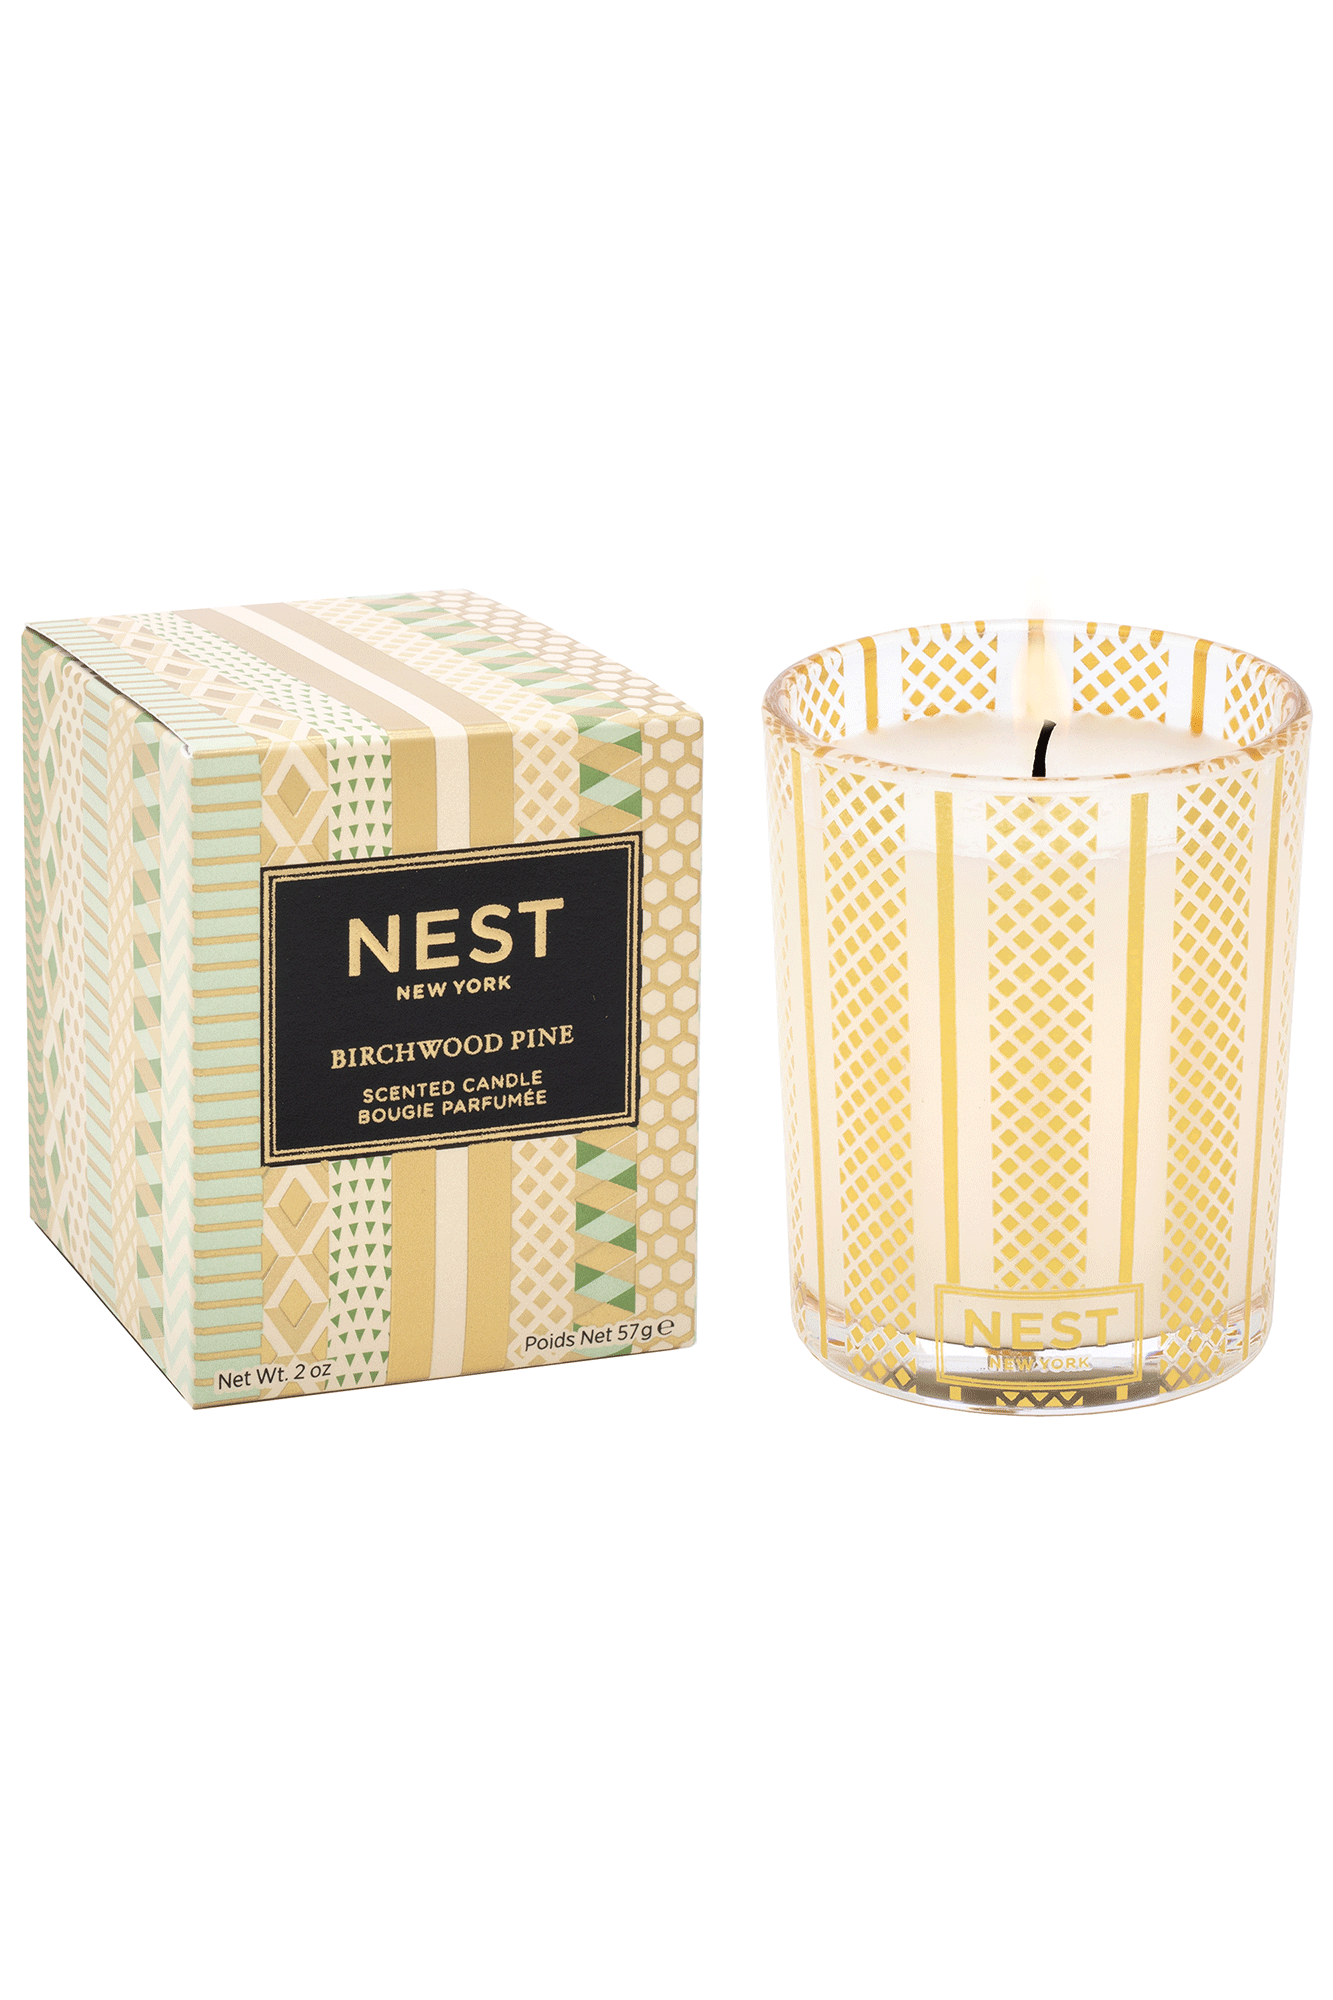 Bring the fresh scent of a winter forest into your home with our Birchwood & Pine Votive Candle from Nest. This bestselling fragrance is crafted from a blend of white pine, fir balsam, and birchwood, layered over a warm base of amber and musk. Refresh your home and relax in the inviting aroma of nature.